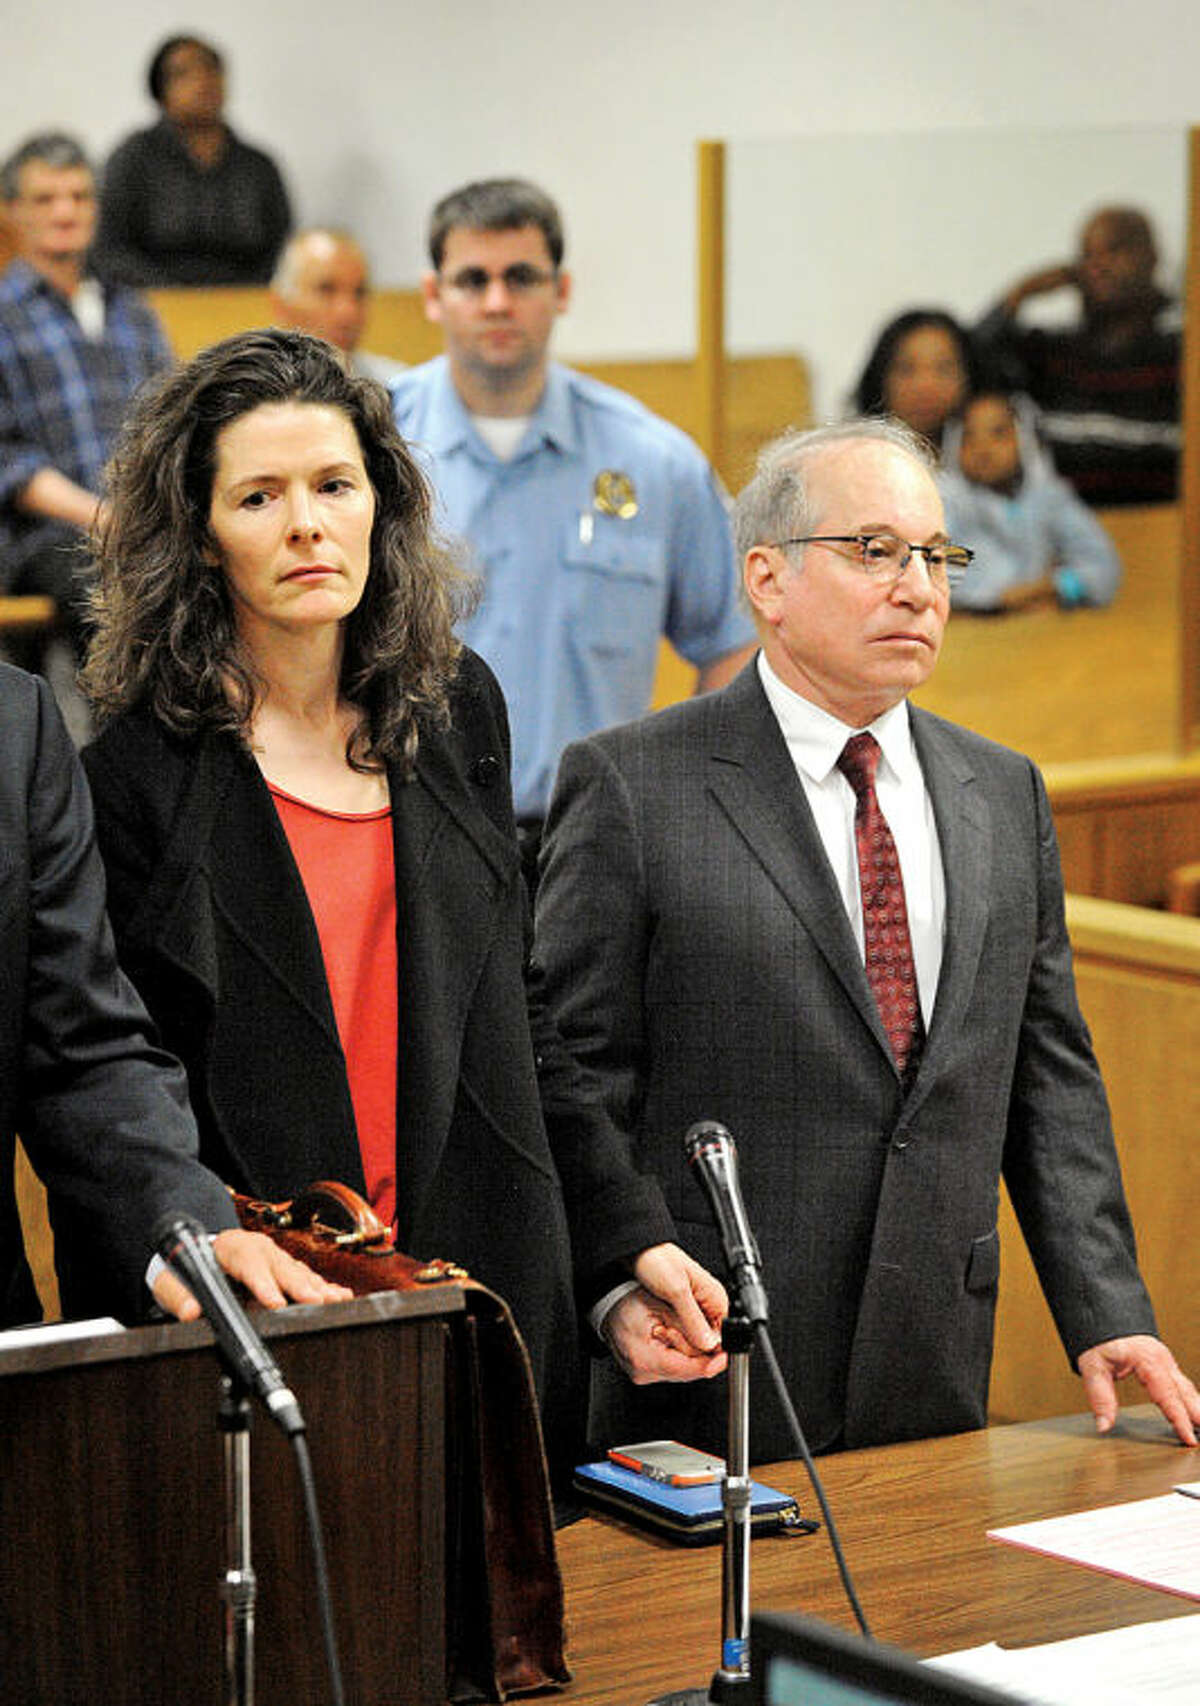 Paul Simon and his wife Edie Brickell hold hands inside the Norwalk Conn. Superior Court House Friday May, 16, 2014 for a domestic dispute hearing . (Pool Photo/Douglas Healey).